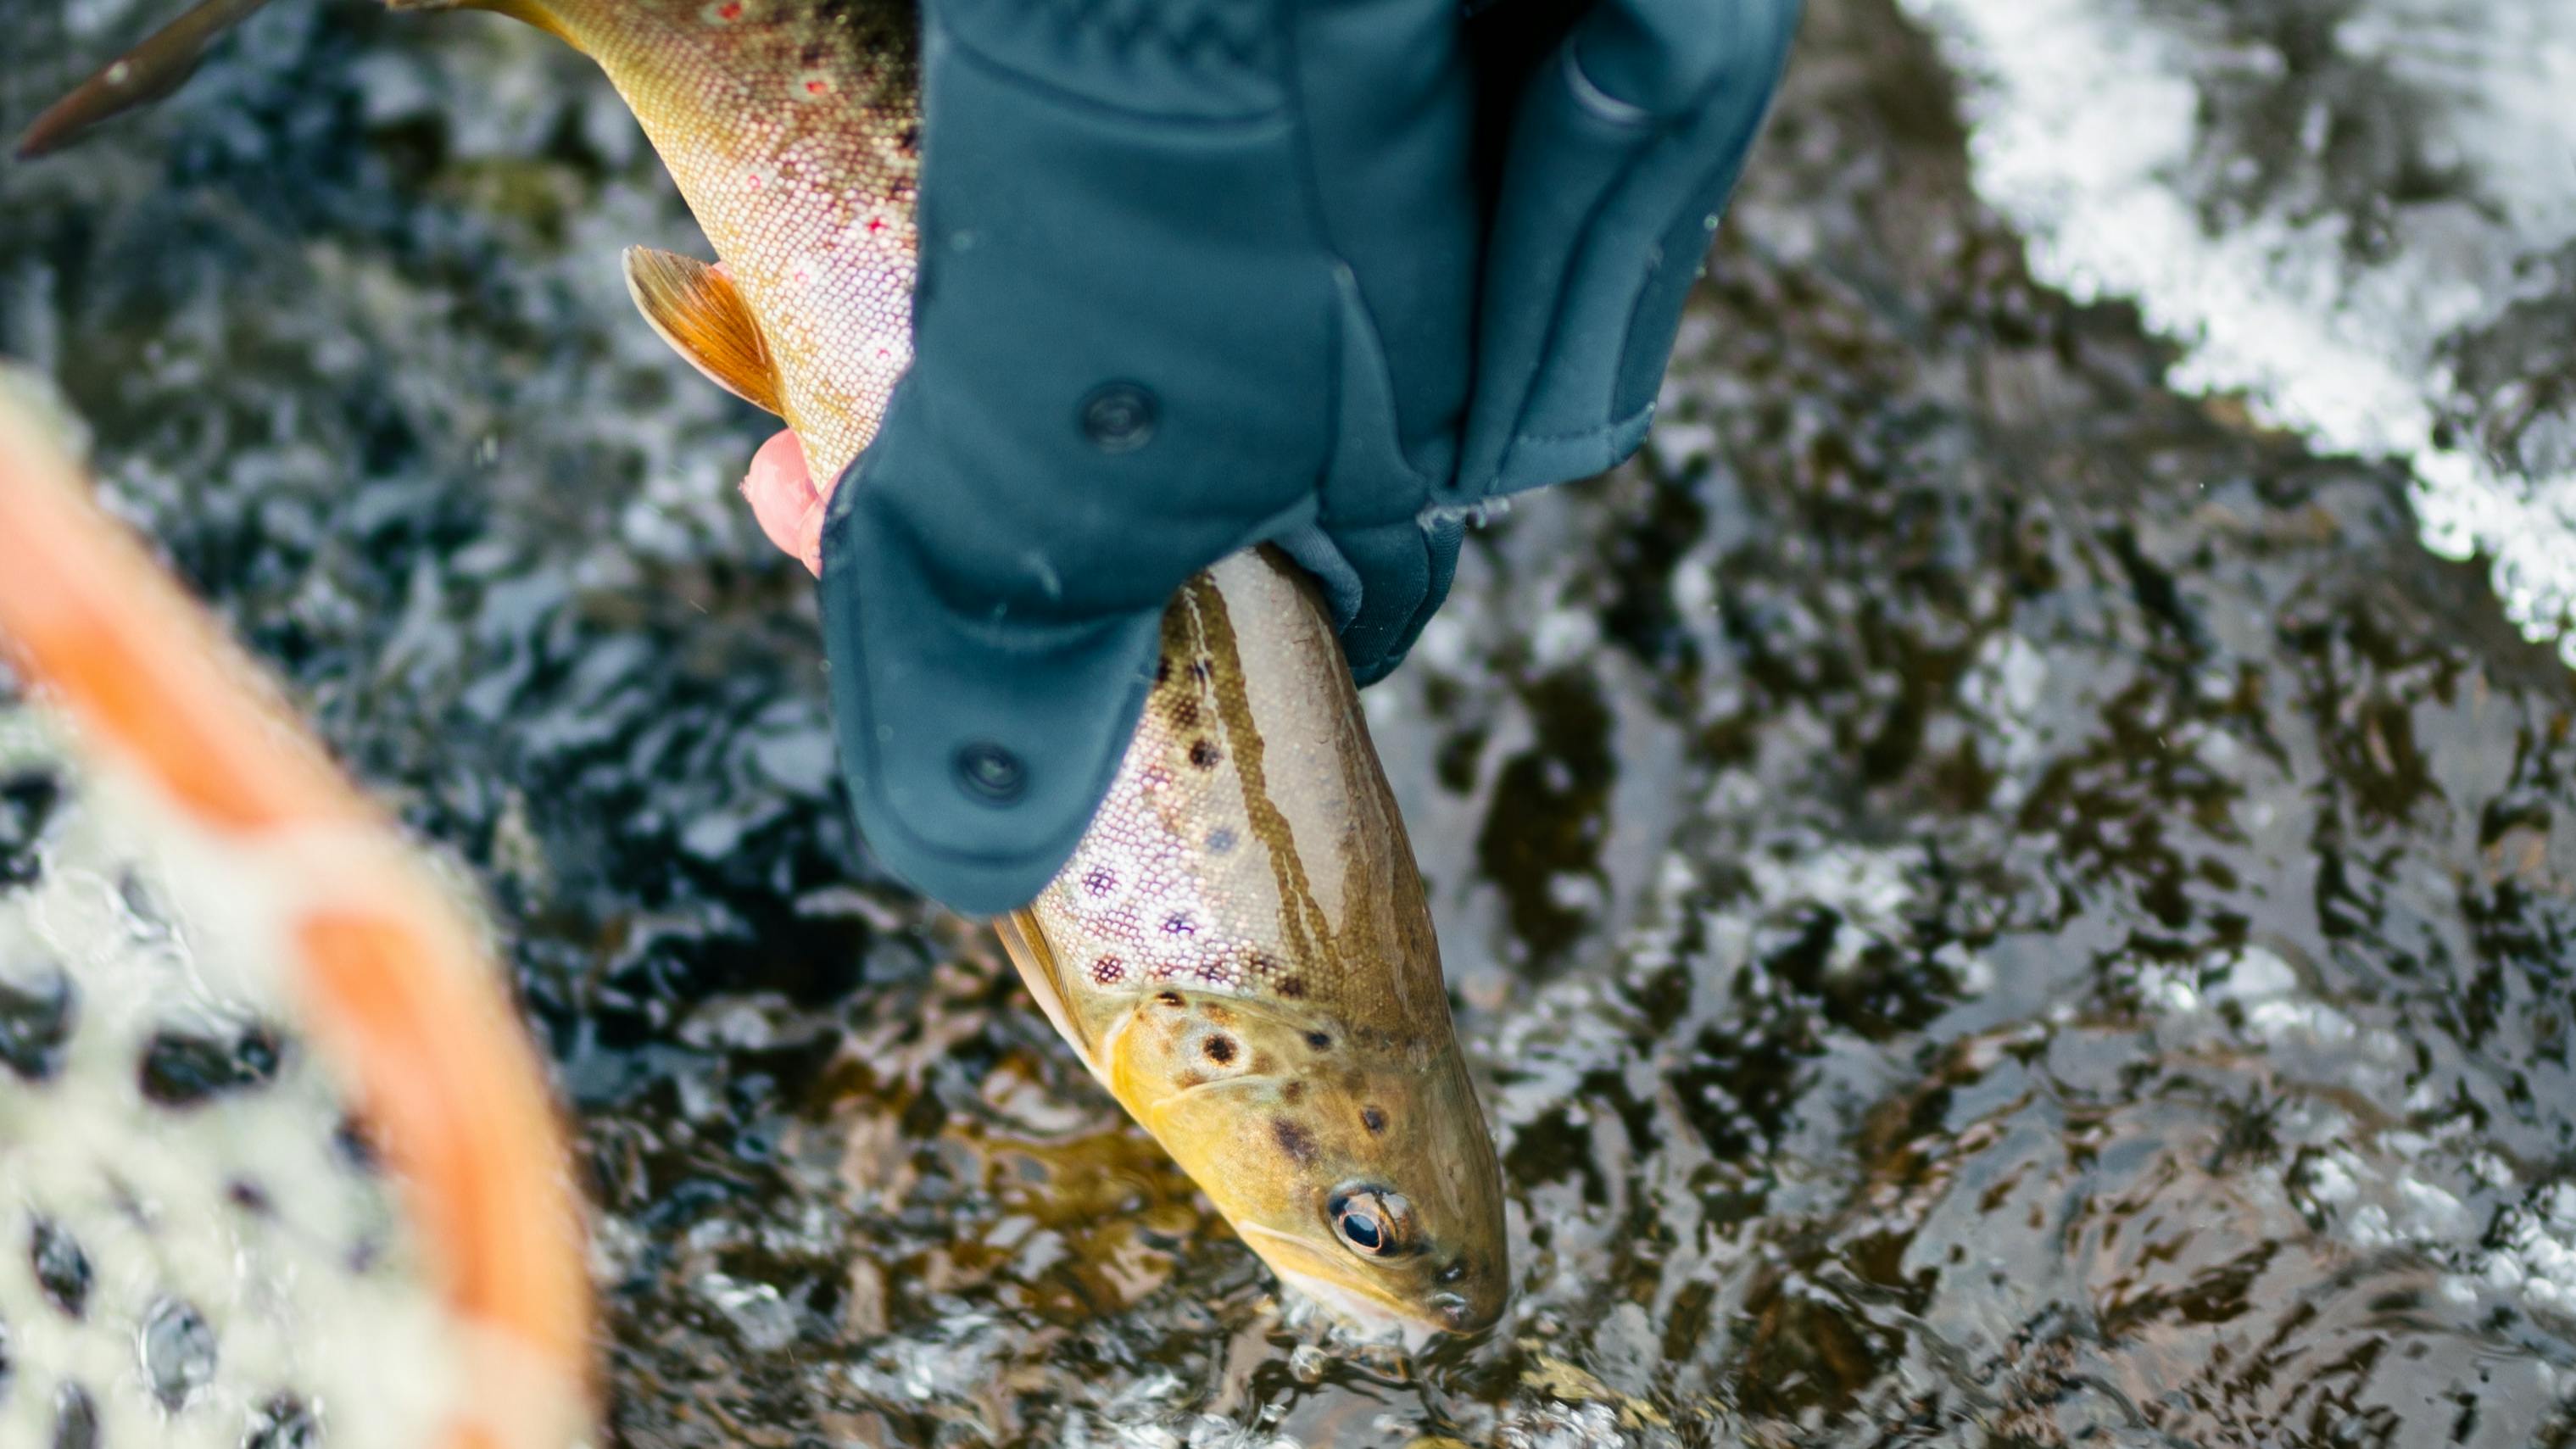 A trout is held in a winter glove. There is ice in the river that the trout came from and a fishing net is visible in the frame.